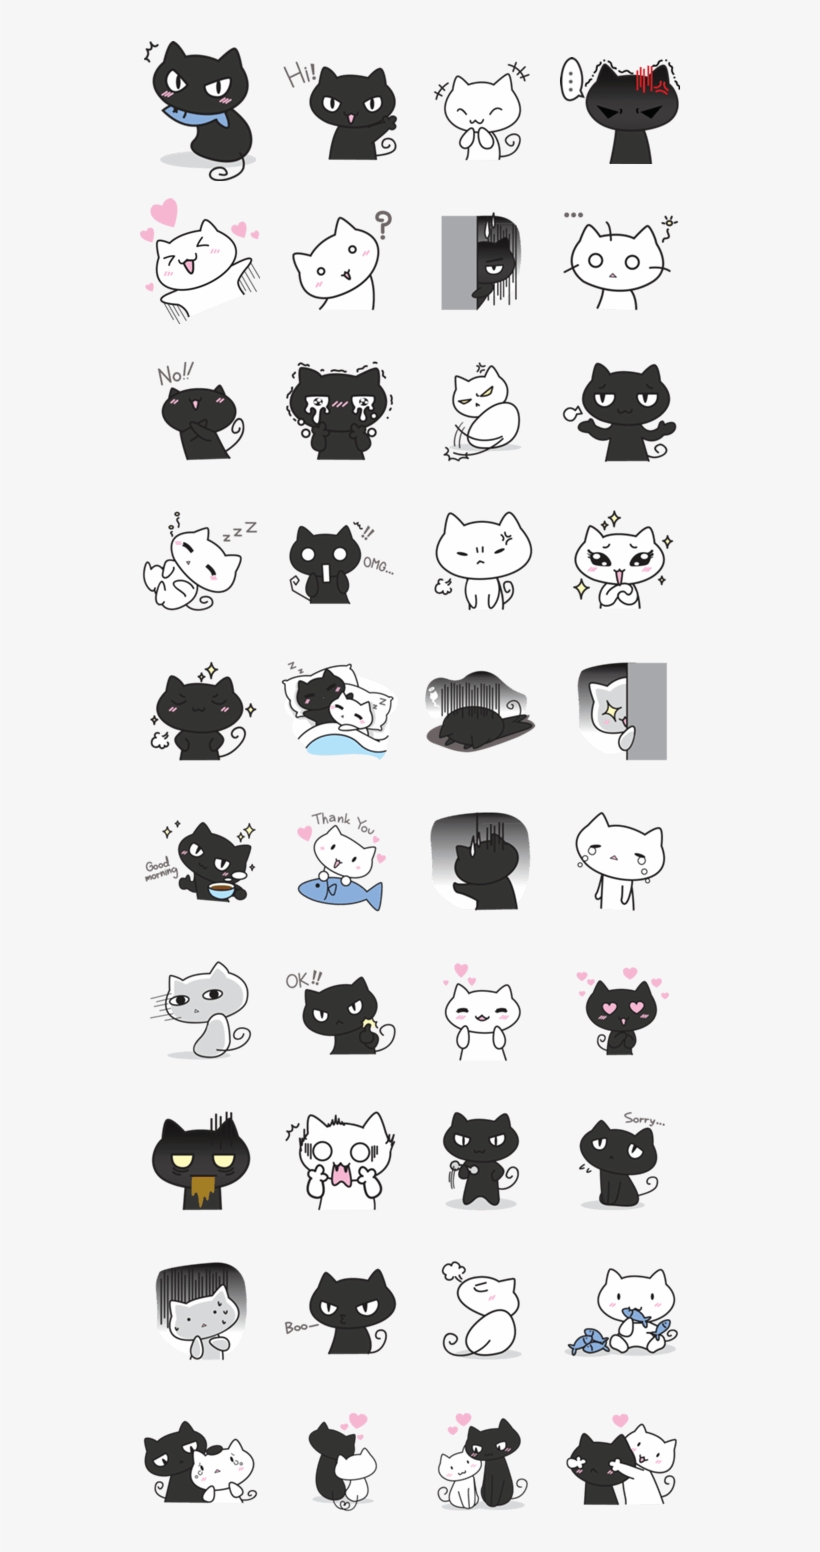 More - Kawaii Stickers Black And White, transparent png #1718419